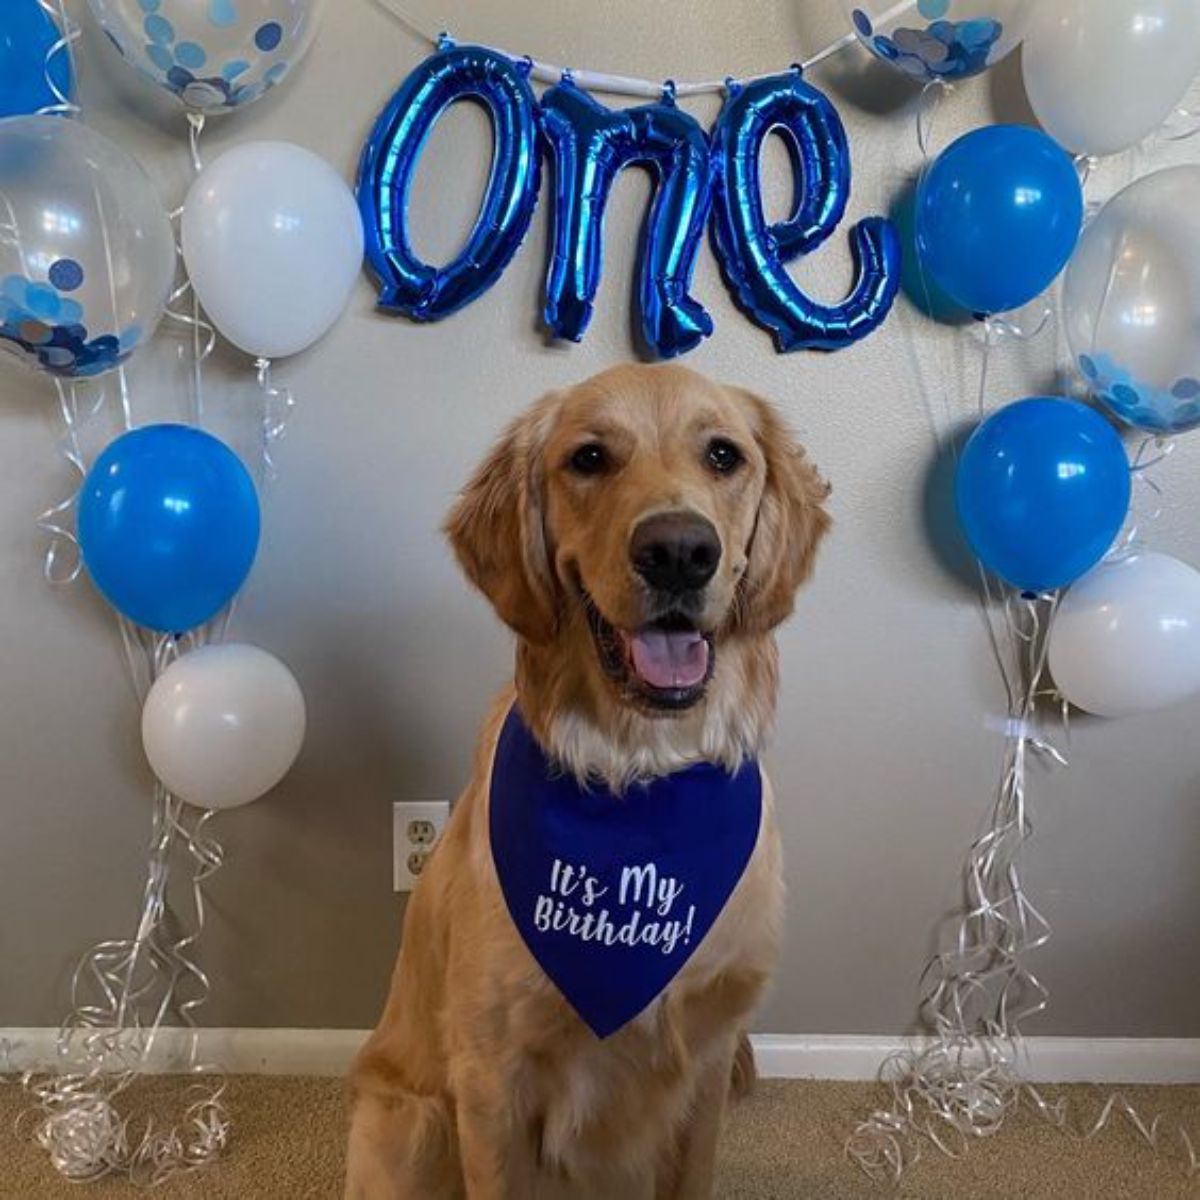 golden retriever wearing an it's my birthday bandana with blue and white balloons behind it